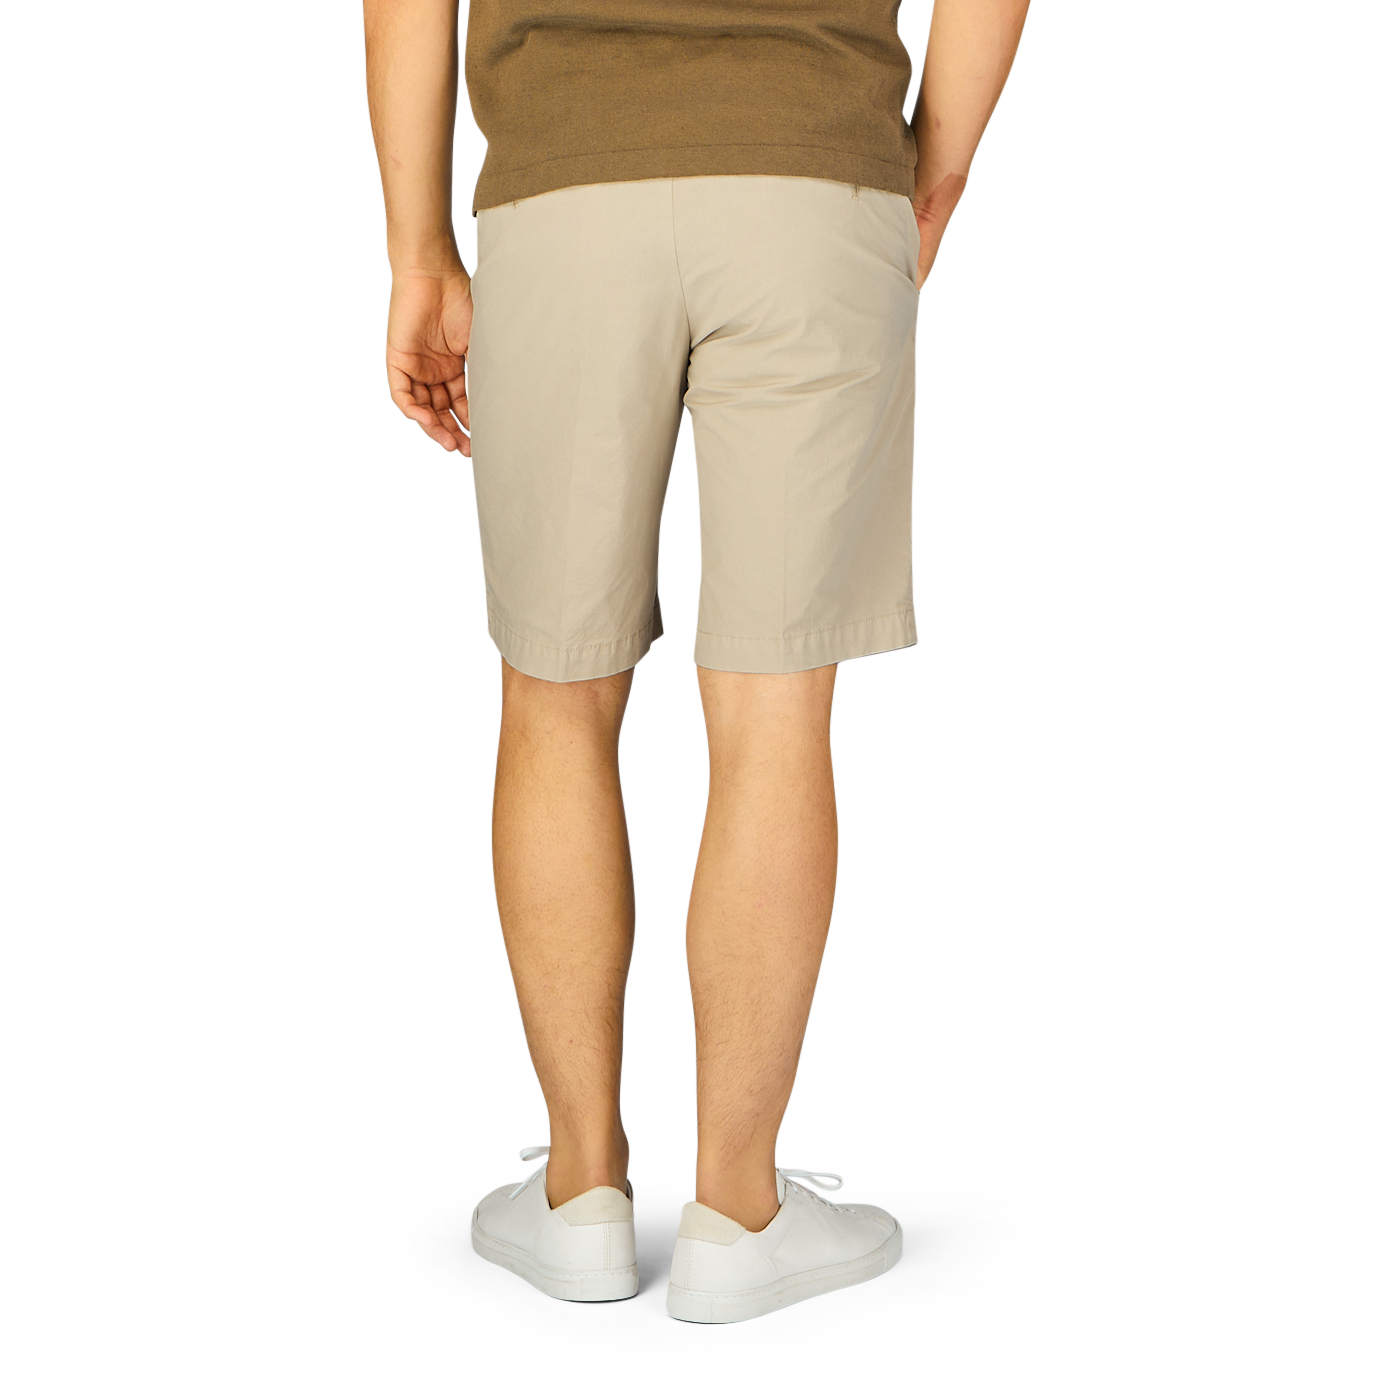 Person wearing Beige Cotton Drawstring Malibu Shorts by Briglia and white sneakers standing against a light background.